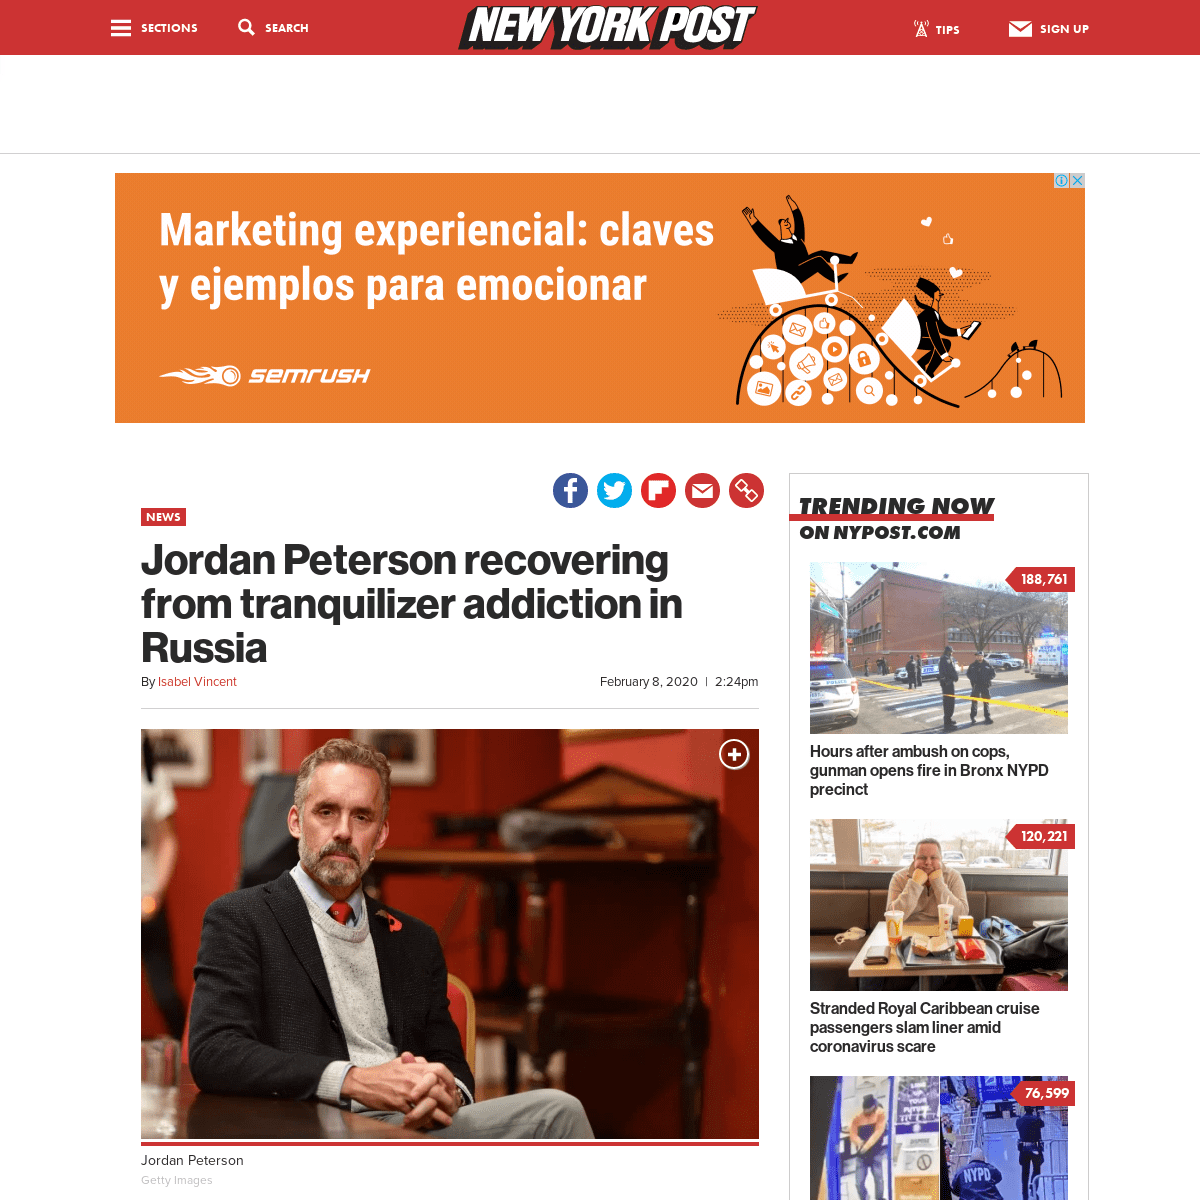 A complete backup of nypost.com/2020/02/08/jordan-peterson-recovering-from-tranquilizer-addiction-in-russia/